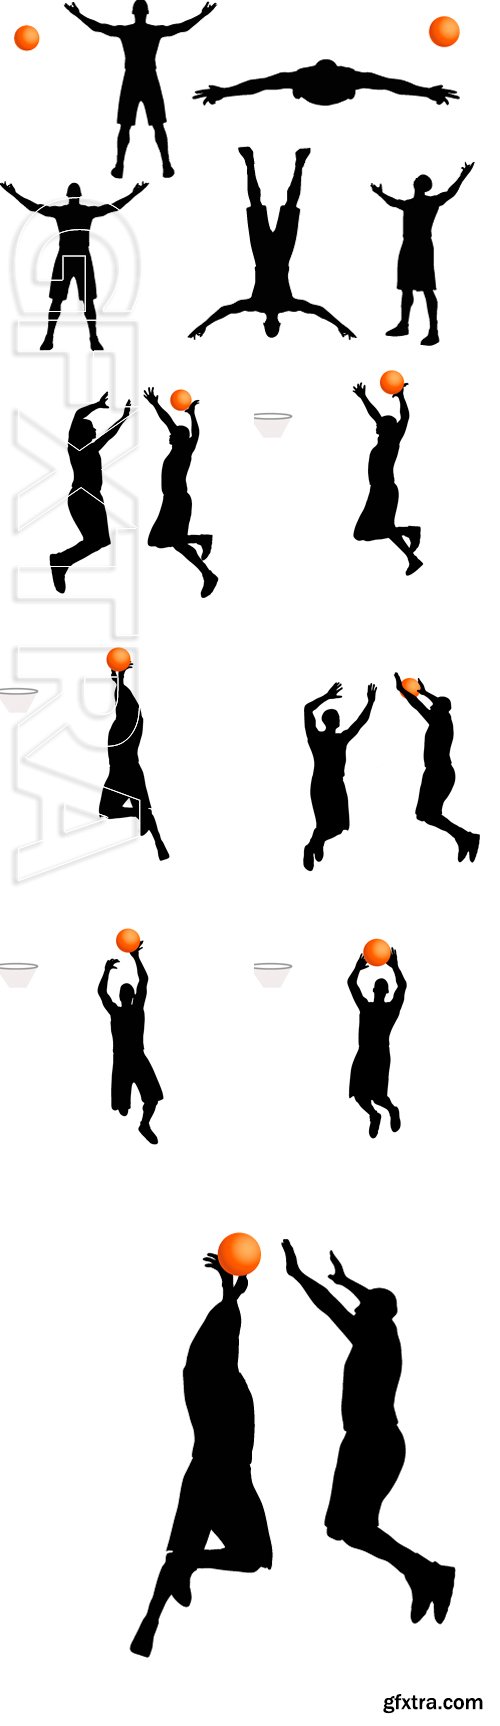 Stock Vectors - Vector Image - basketball player man silhouette isolated on white background